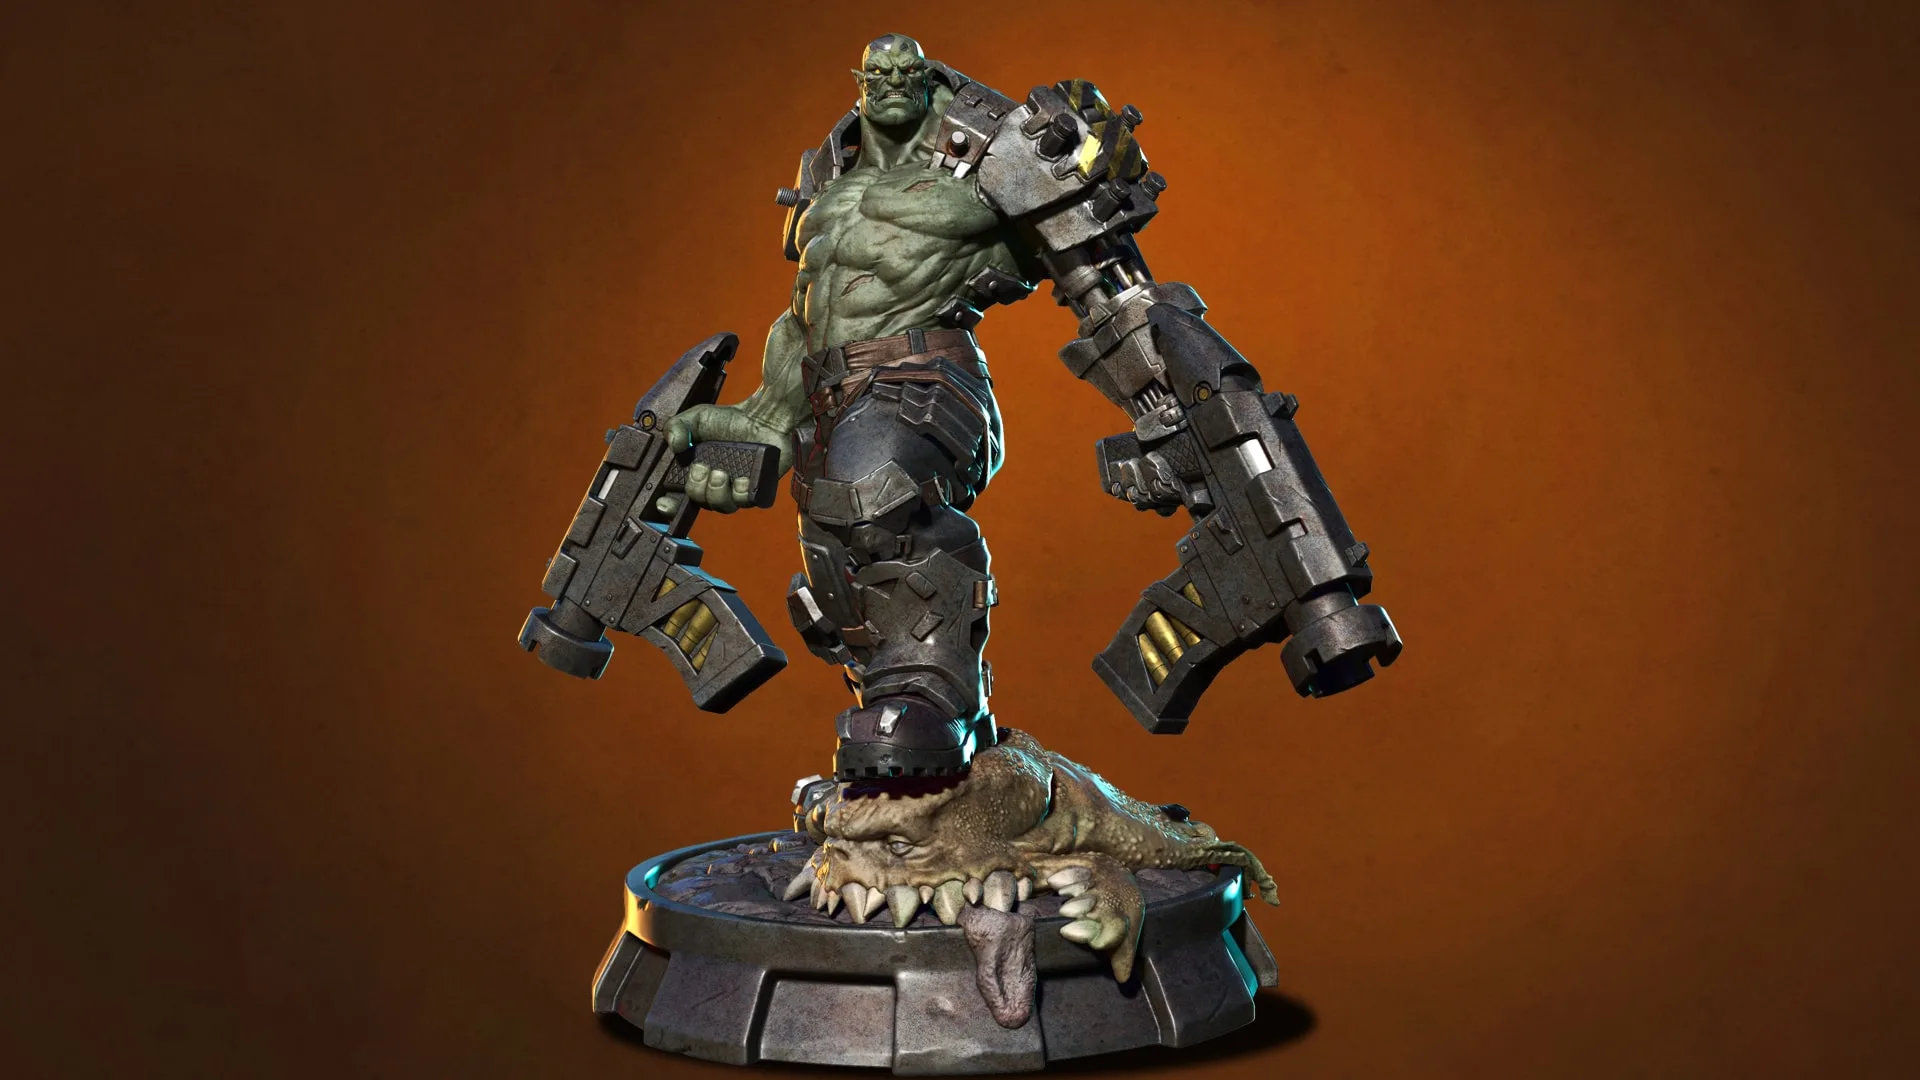 Orc Cyborg Character Creation in Zbrush